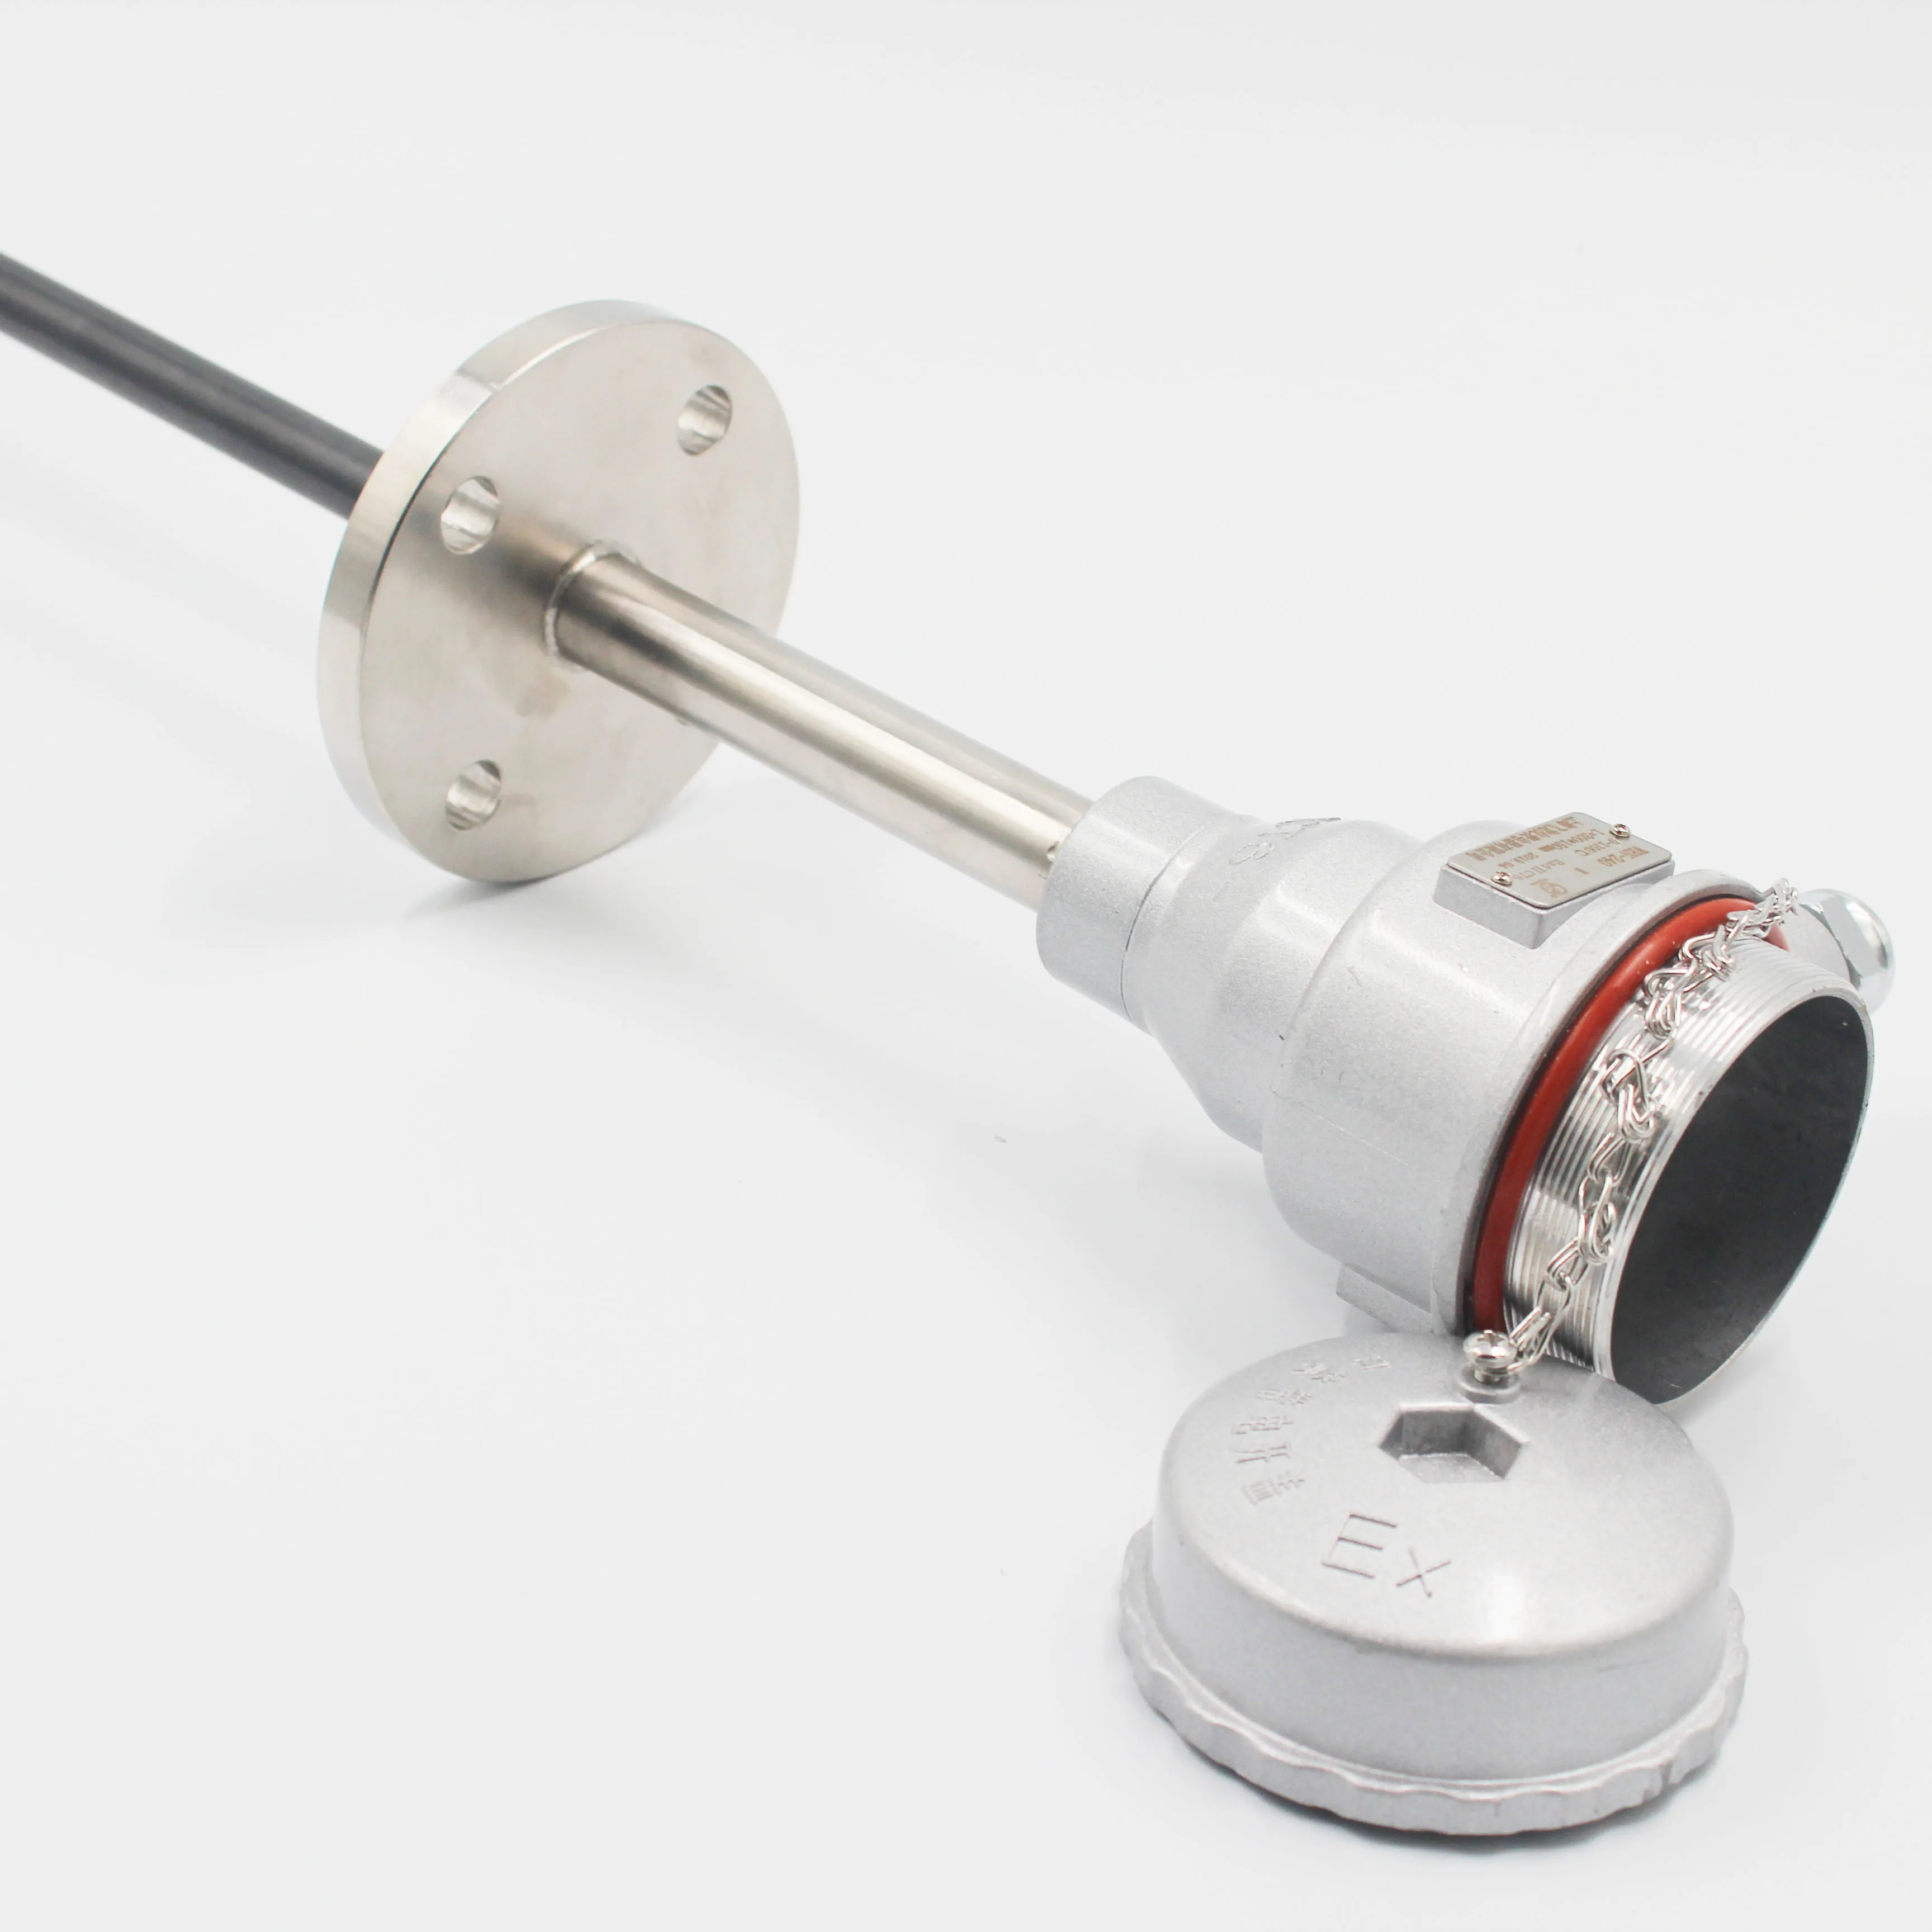 JVTIA custom thermocouples supplier for temperature measurement and control-6